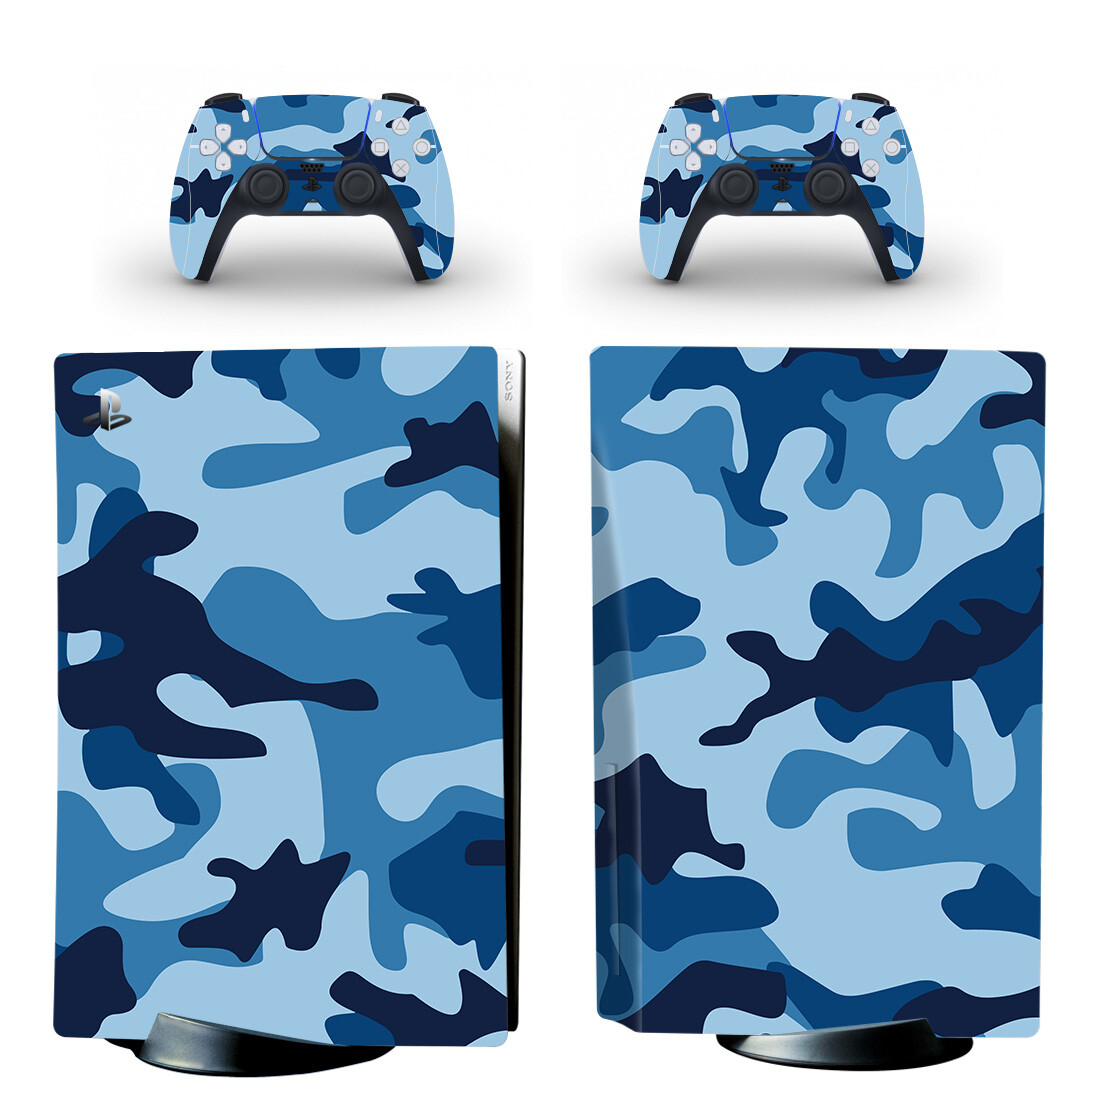 Sea Camouflage Skin Sticker Decal For PlayStation 5